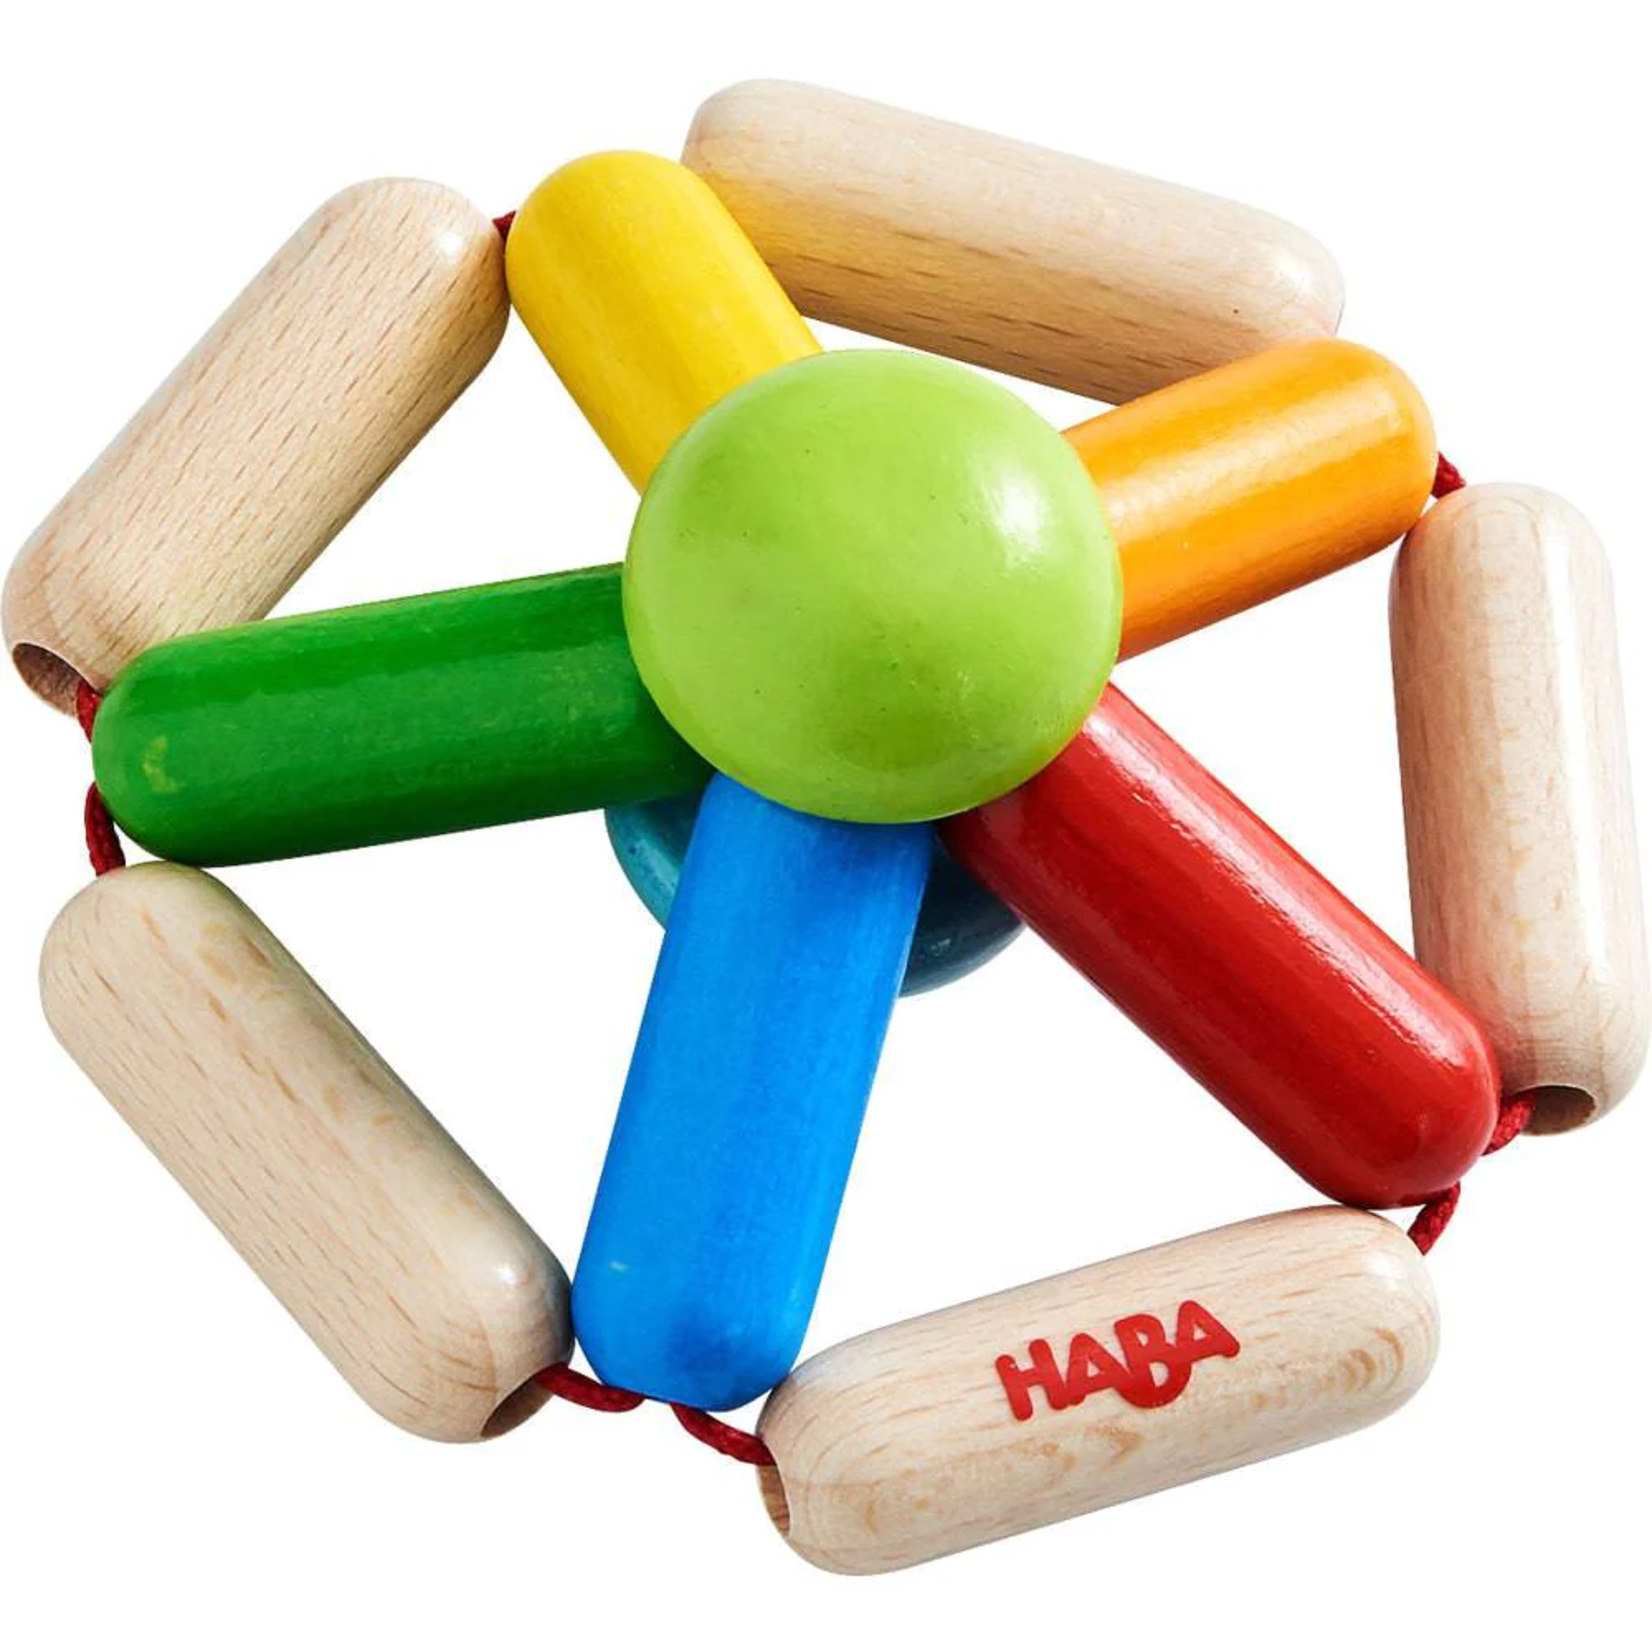 Haba Color Carousel Wooden Rattle